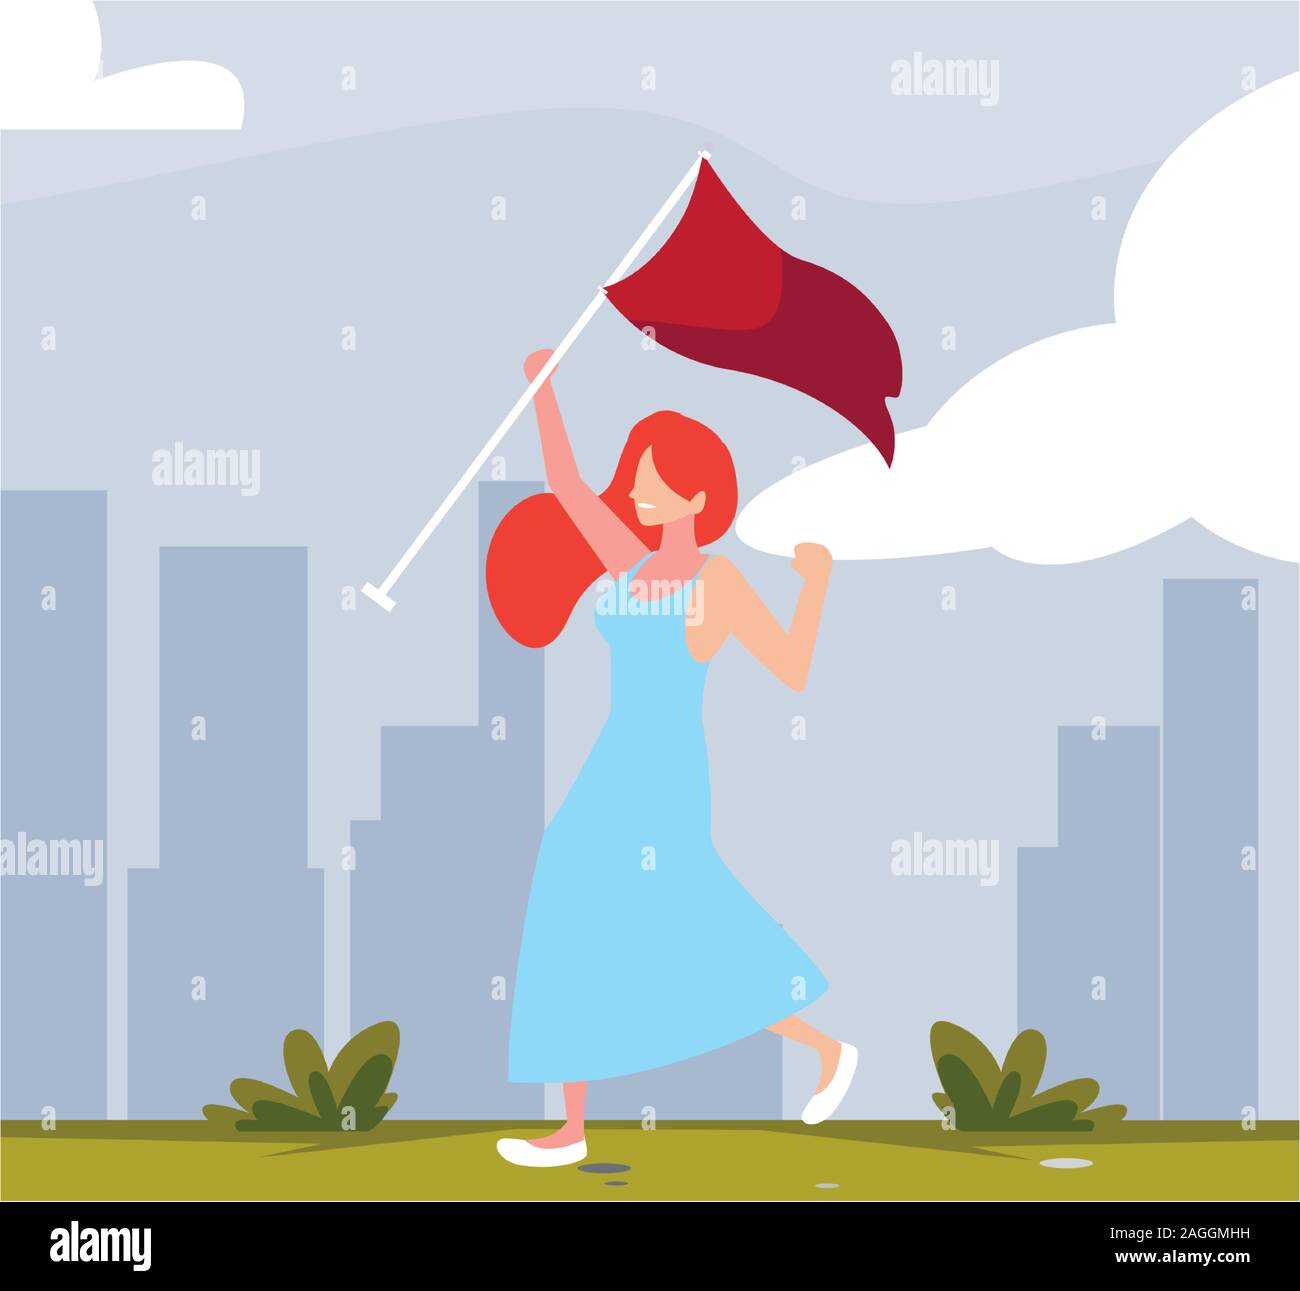 young woman holding a red flag vector illustration design Stock Vector